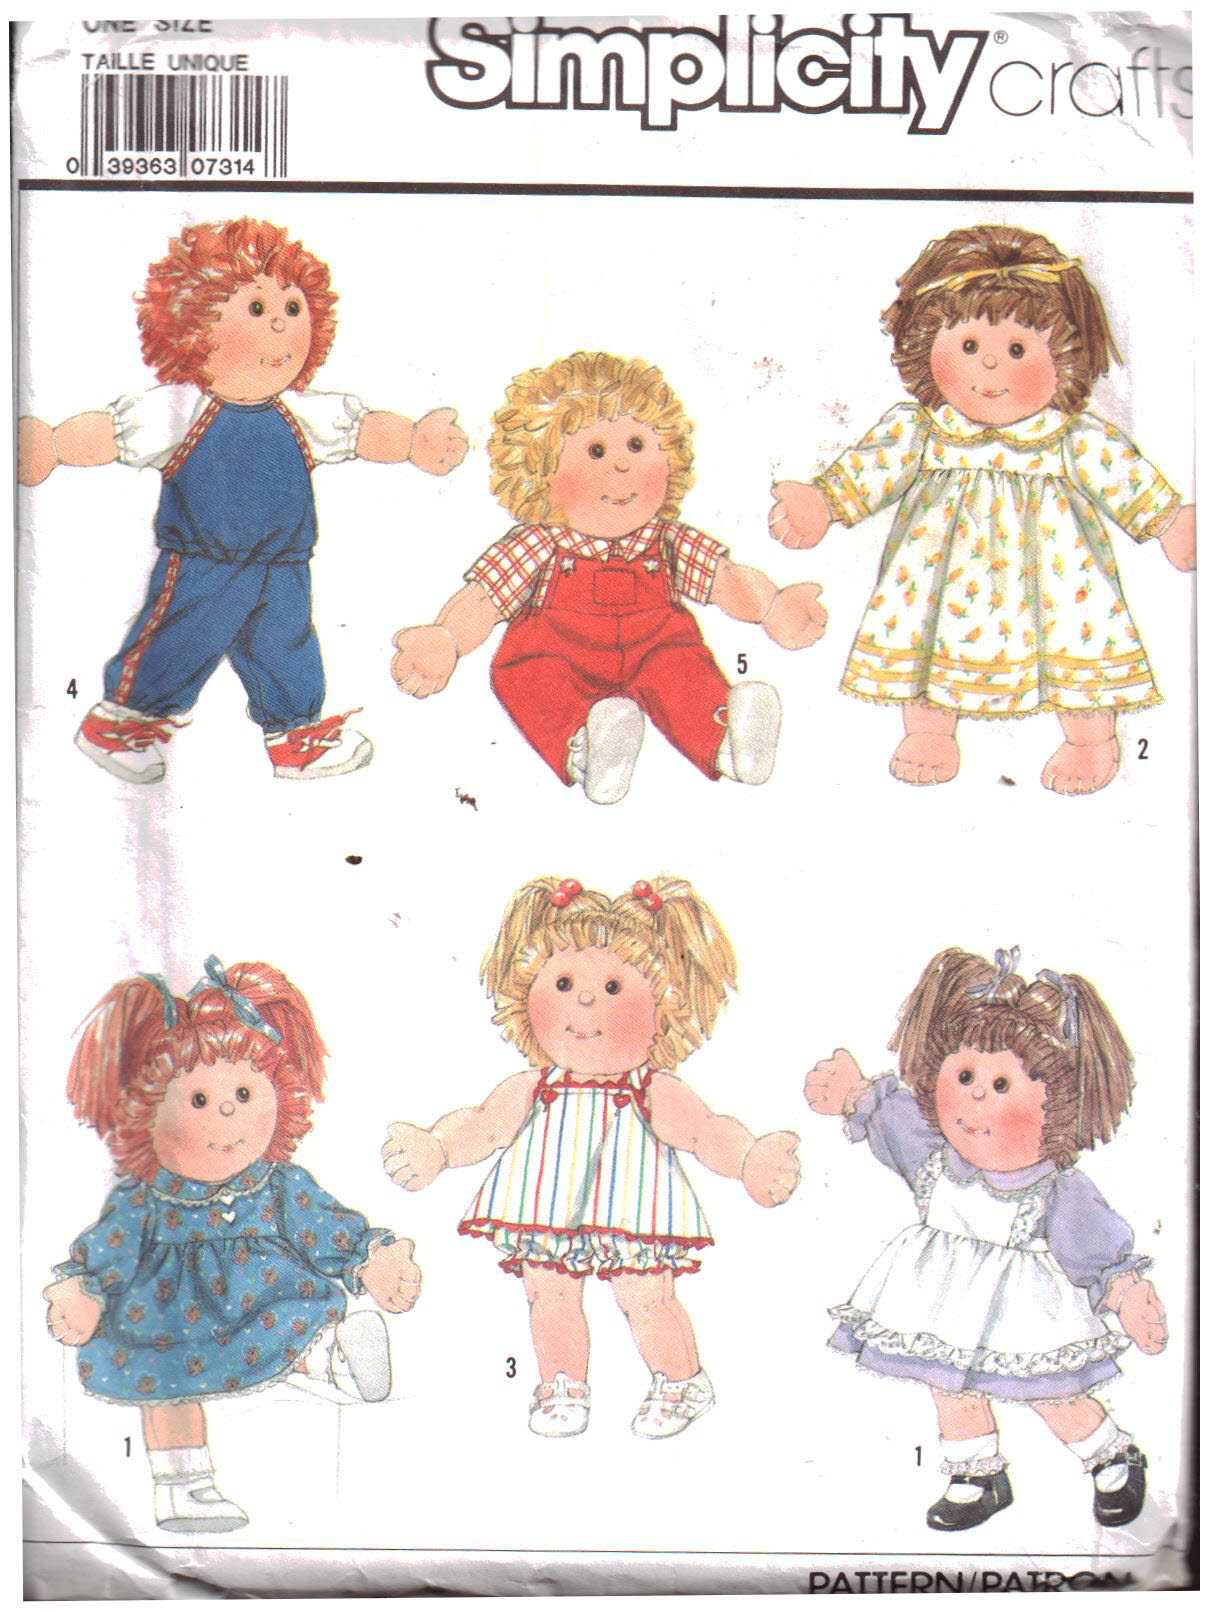 Simplicity 4005/0523 Sewing for Dummies Childs Costume Pattern